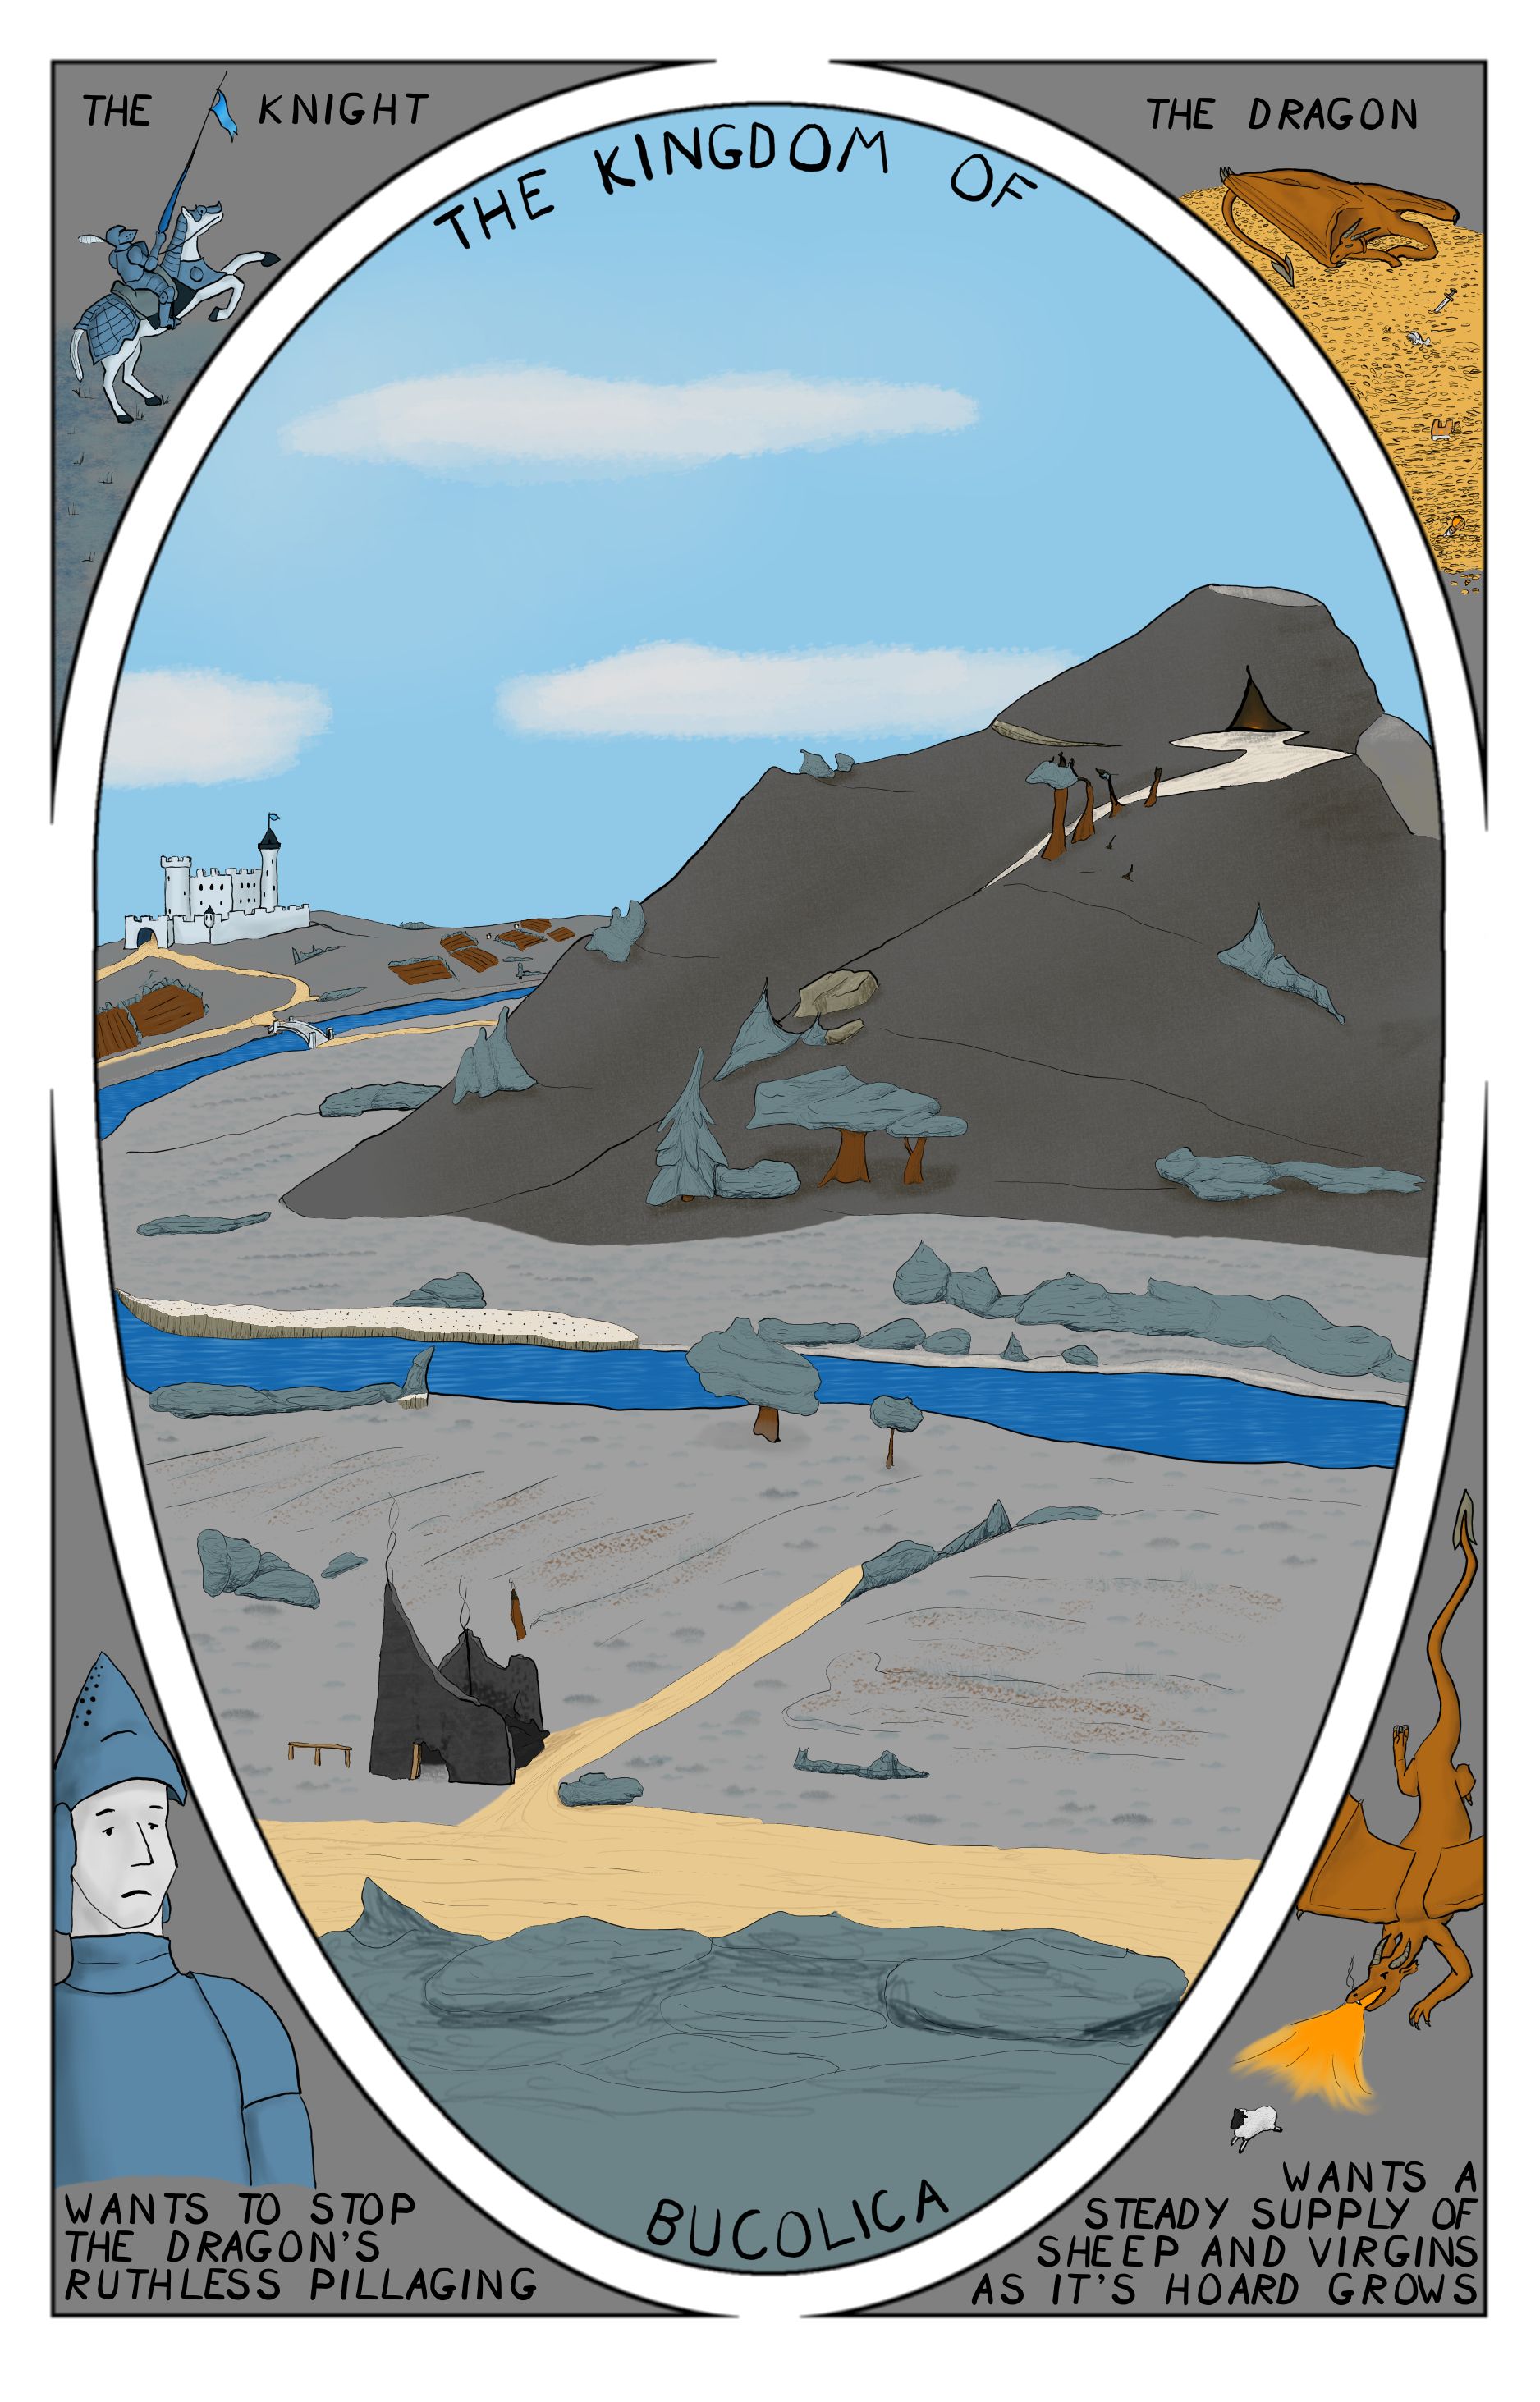 A comic featuring a pastoral scene, with a castle in the background and a cave on a hill in the foreground. in an oval panel with a knight featured on the left hand corners and a dragon featured on the right hand corners.